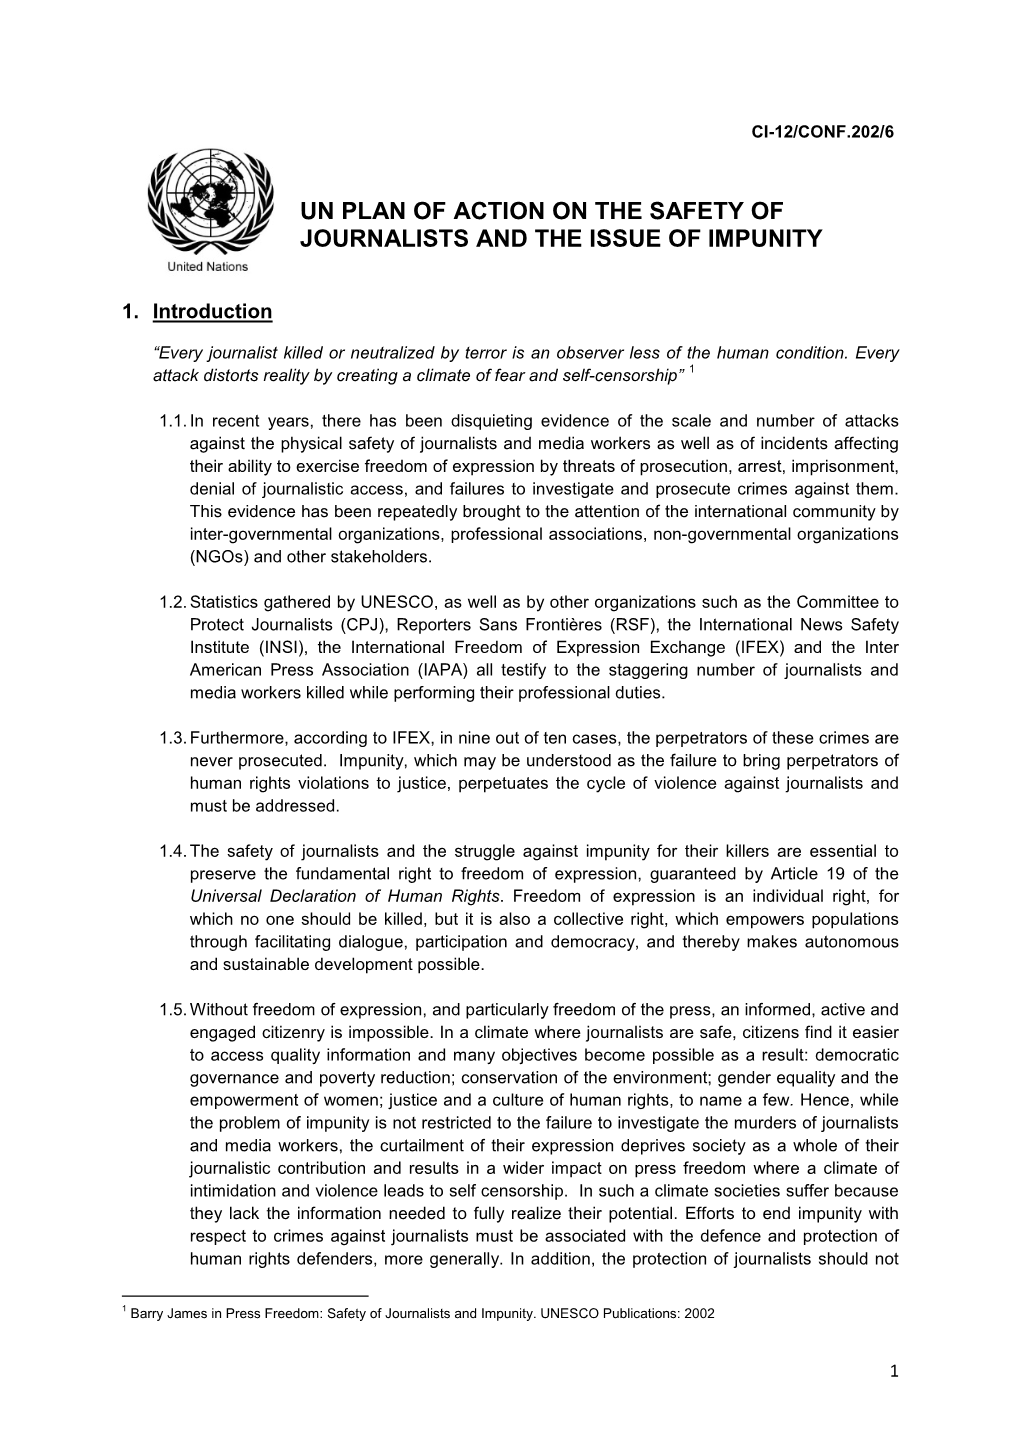 Un Plan of Action on the Safety of Journalists and the Issue of Impunity